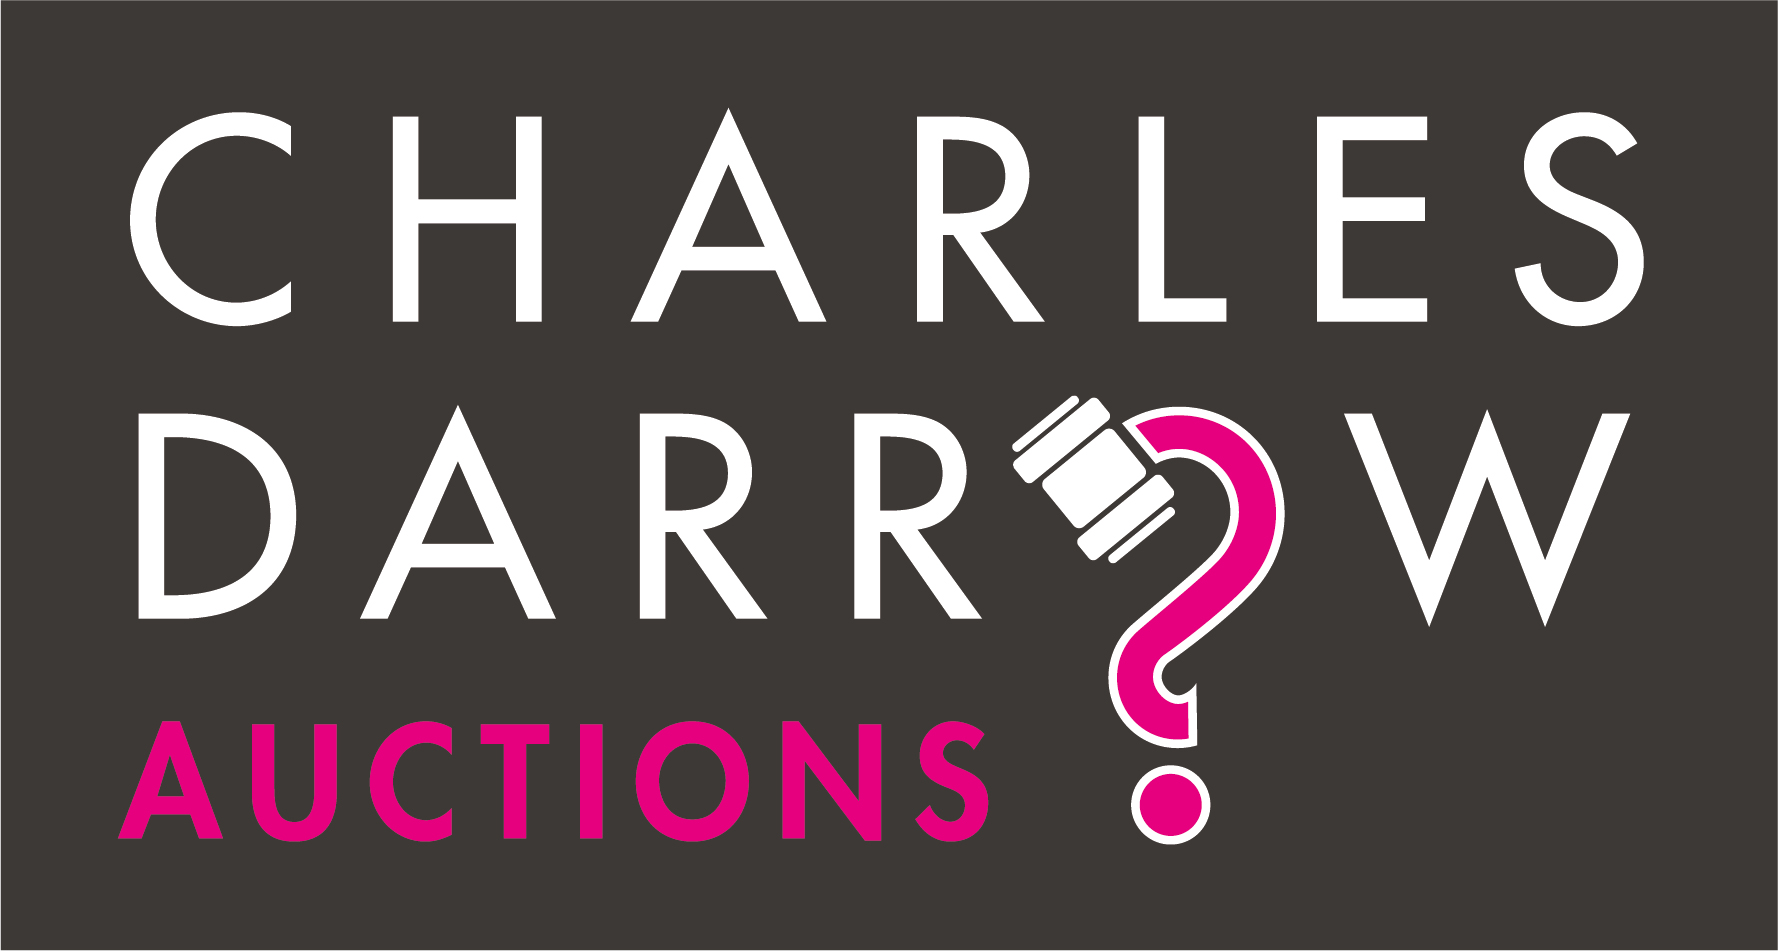 Please contact Charles Darrow Network Auctions on 01626 330022